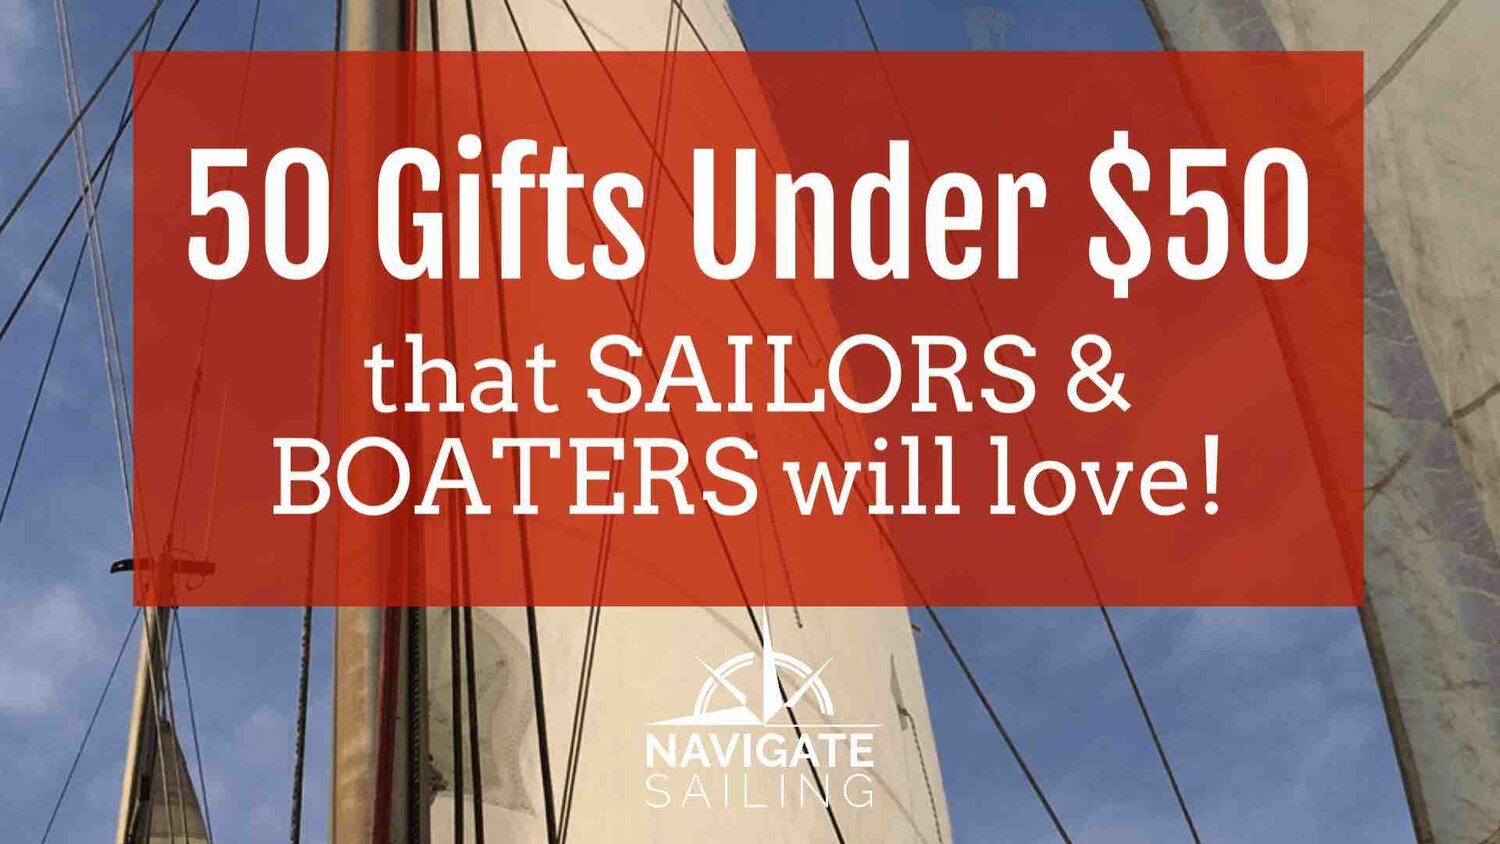 21 Great Gifts for Boat Owners, Sailors, and Sailing Enthusiasts » All Gifts  Considered